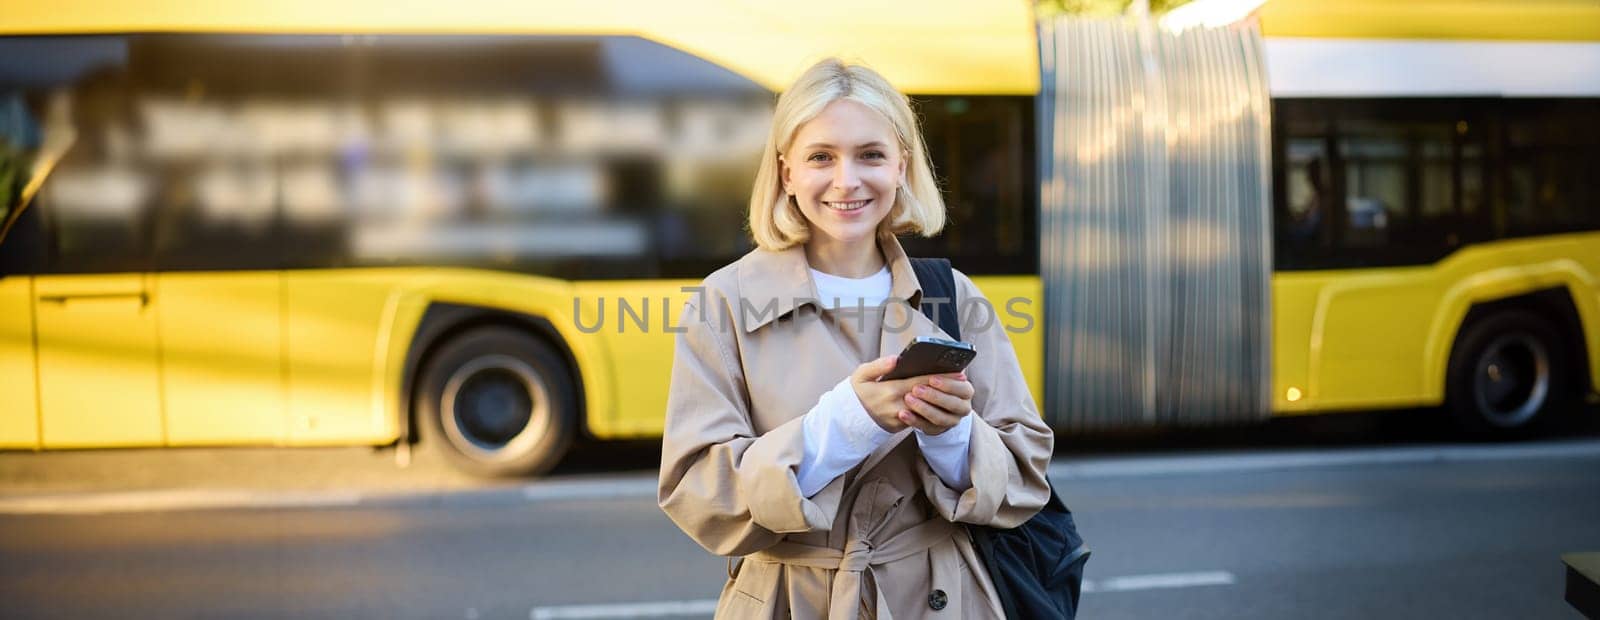 Outdoor shot of young woman with backpack, standing on street with cars passing behind her, holding mobile phone and smiling, urban lifestyle concept.